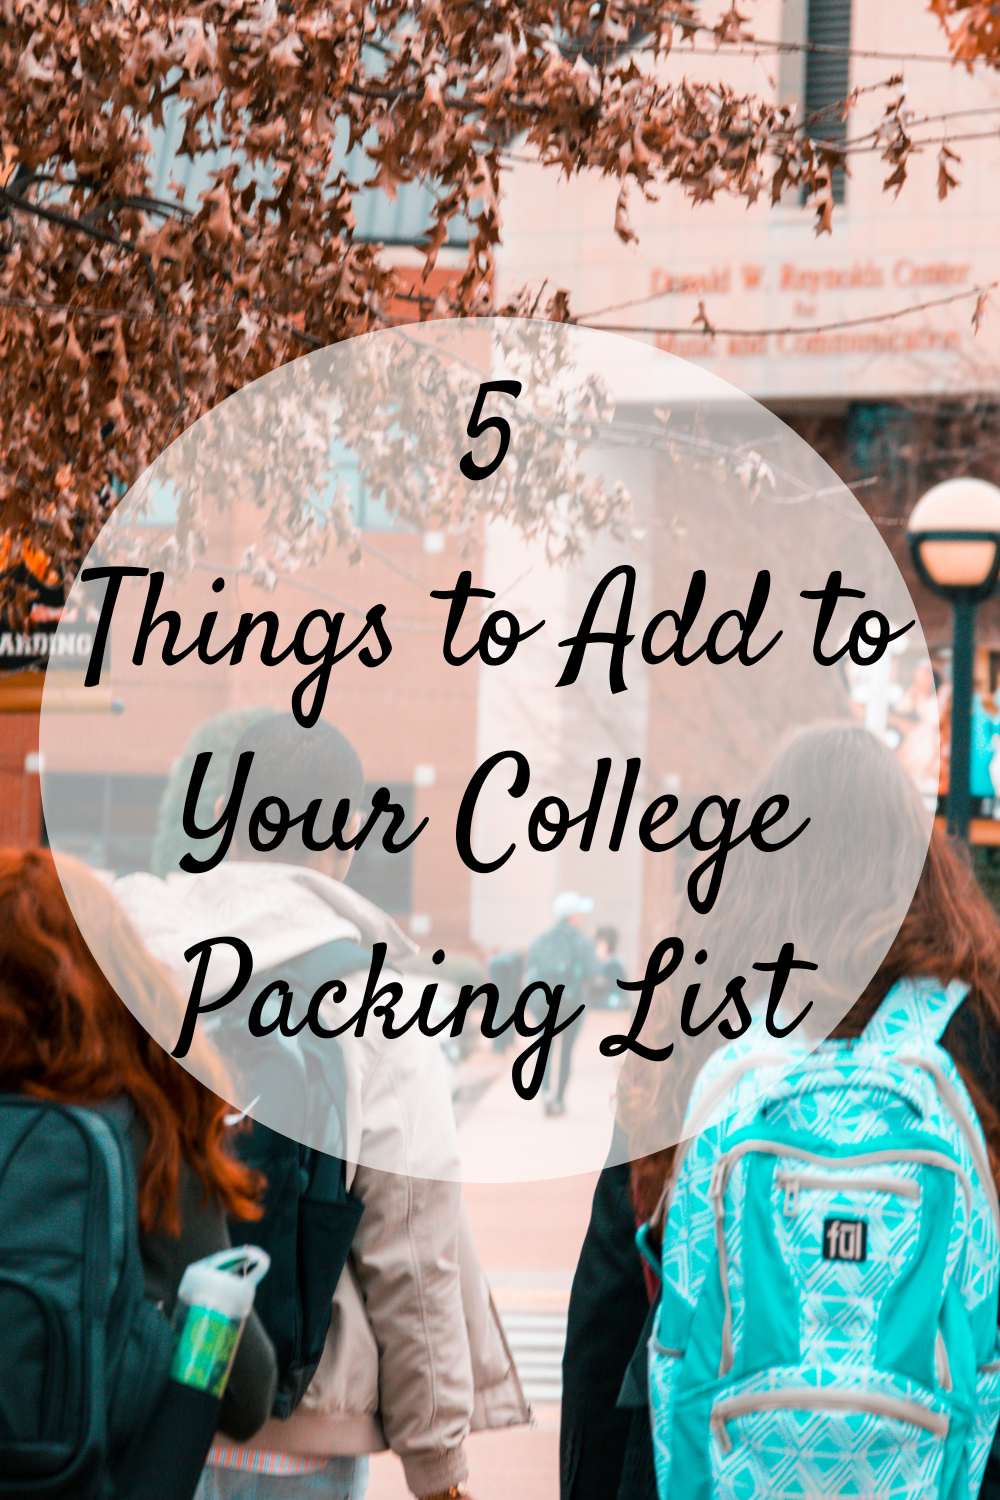 5 Things to Add to Your College Packing List